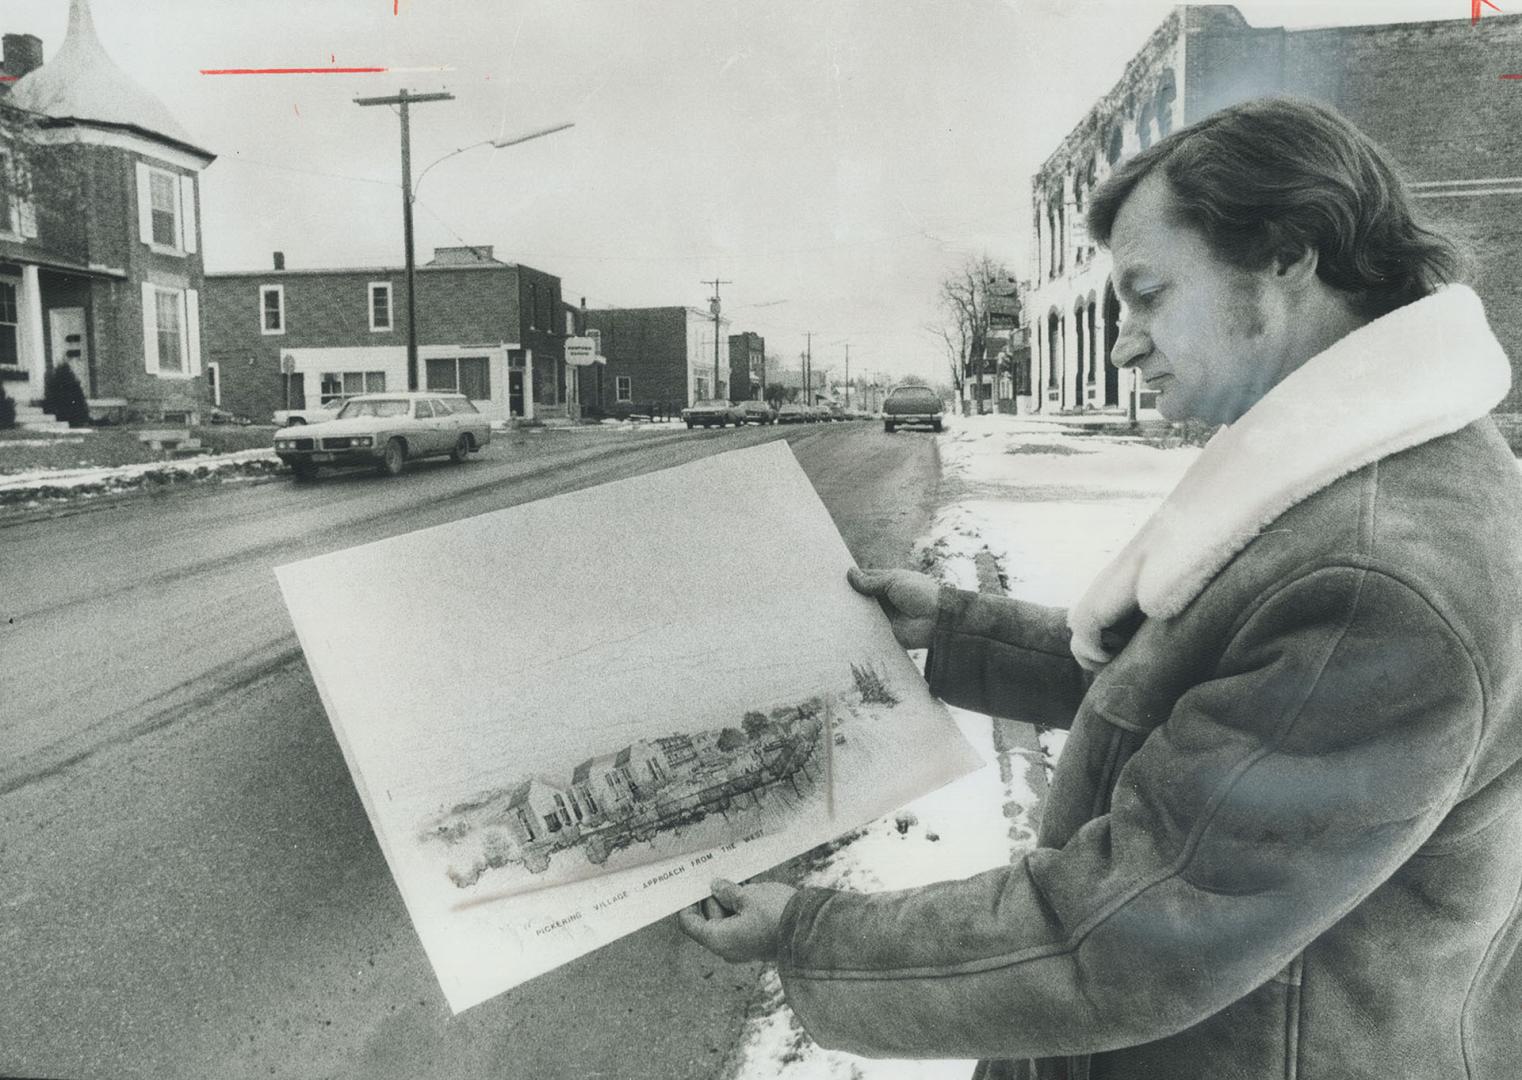 His plan to preserve Pickering, Architect William Beddall looks over sketches of a plan he has proposed to revitalize commercial core (background) of Pickering Village.